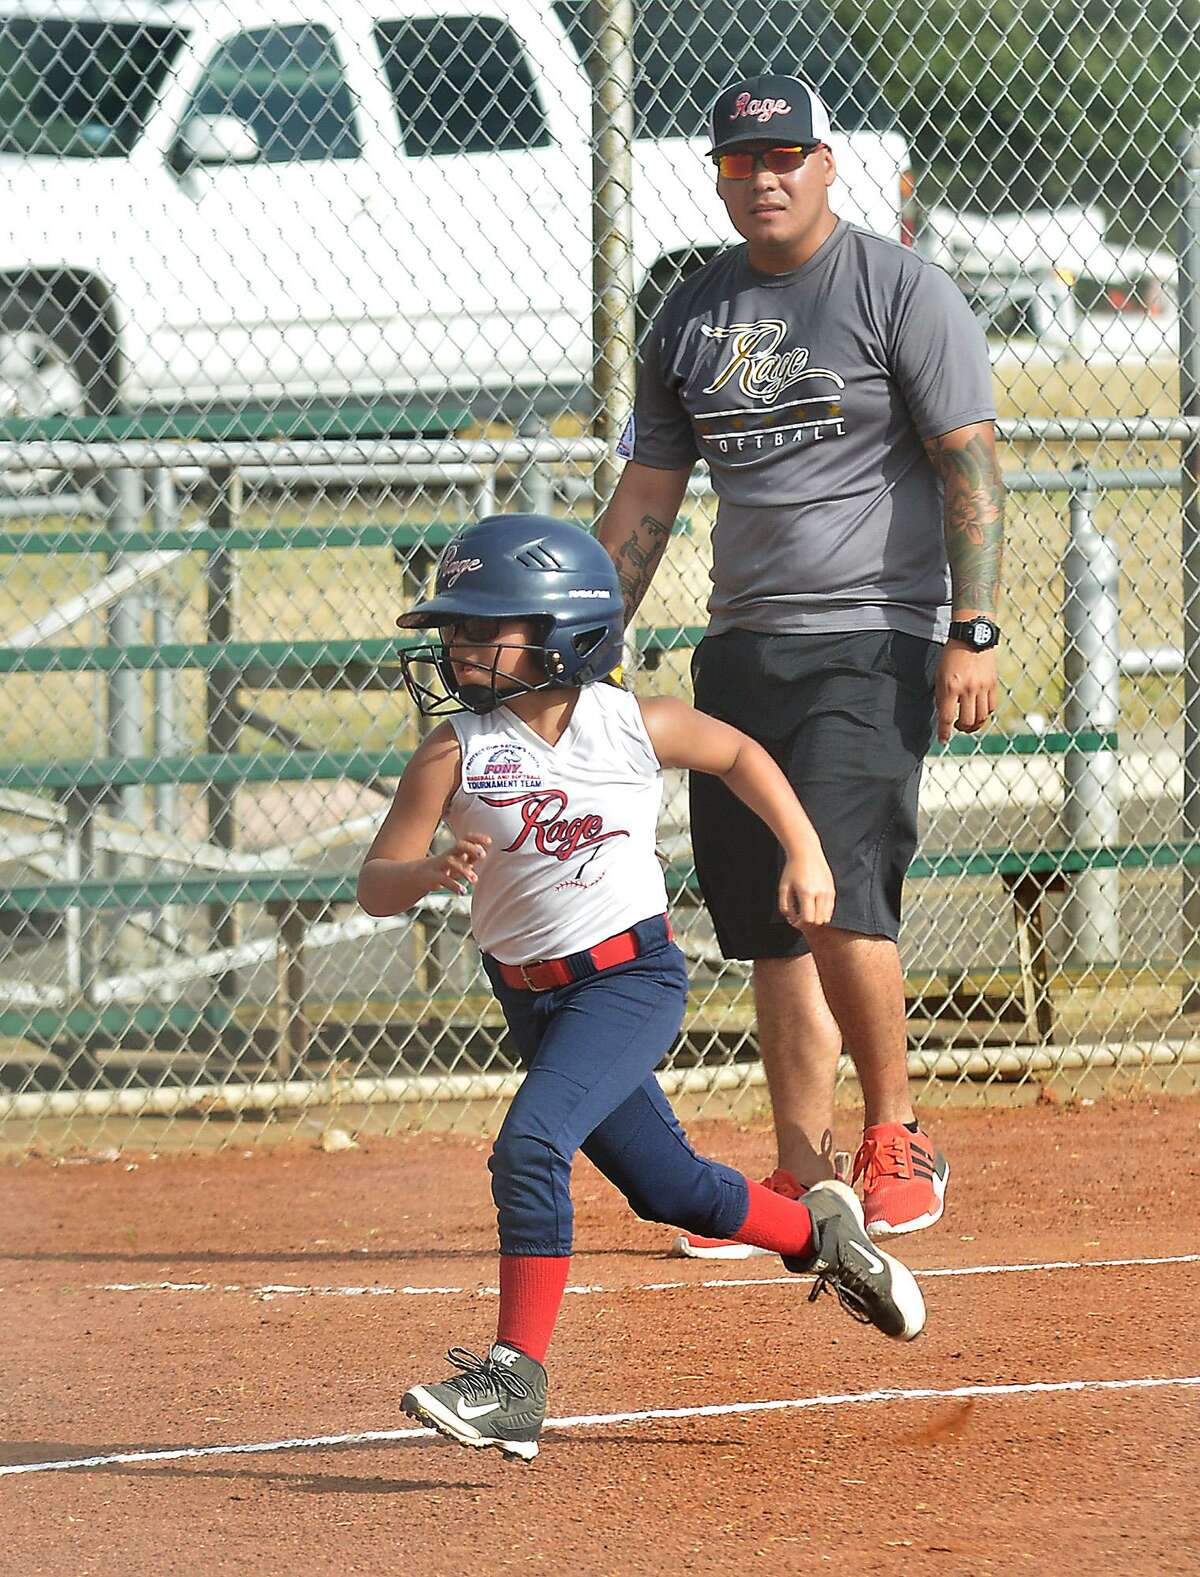 The 6U Laredo Lady Tigers lost in the opening round of the PONY League Softball World Series tournament to the Normoyle Lady Yankees in the Grey Bracket and earlier to the Sparkling City Rage during pool play.